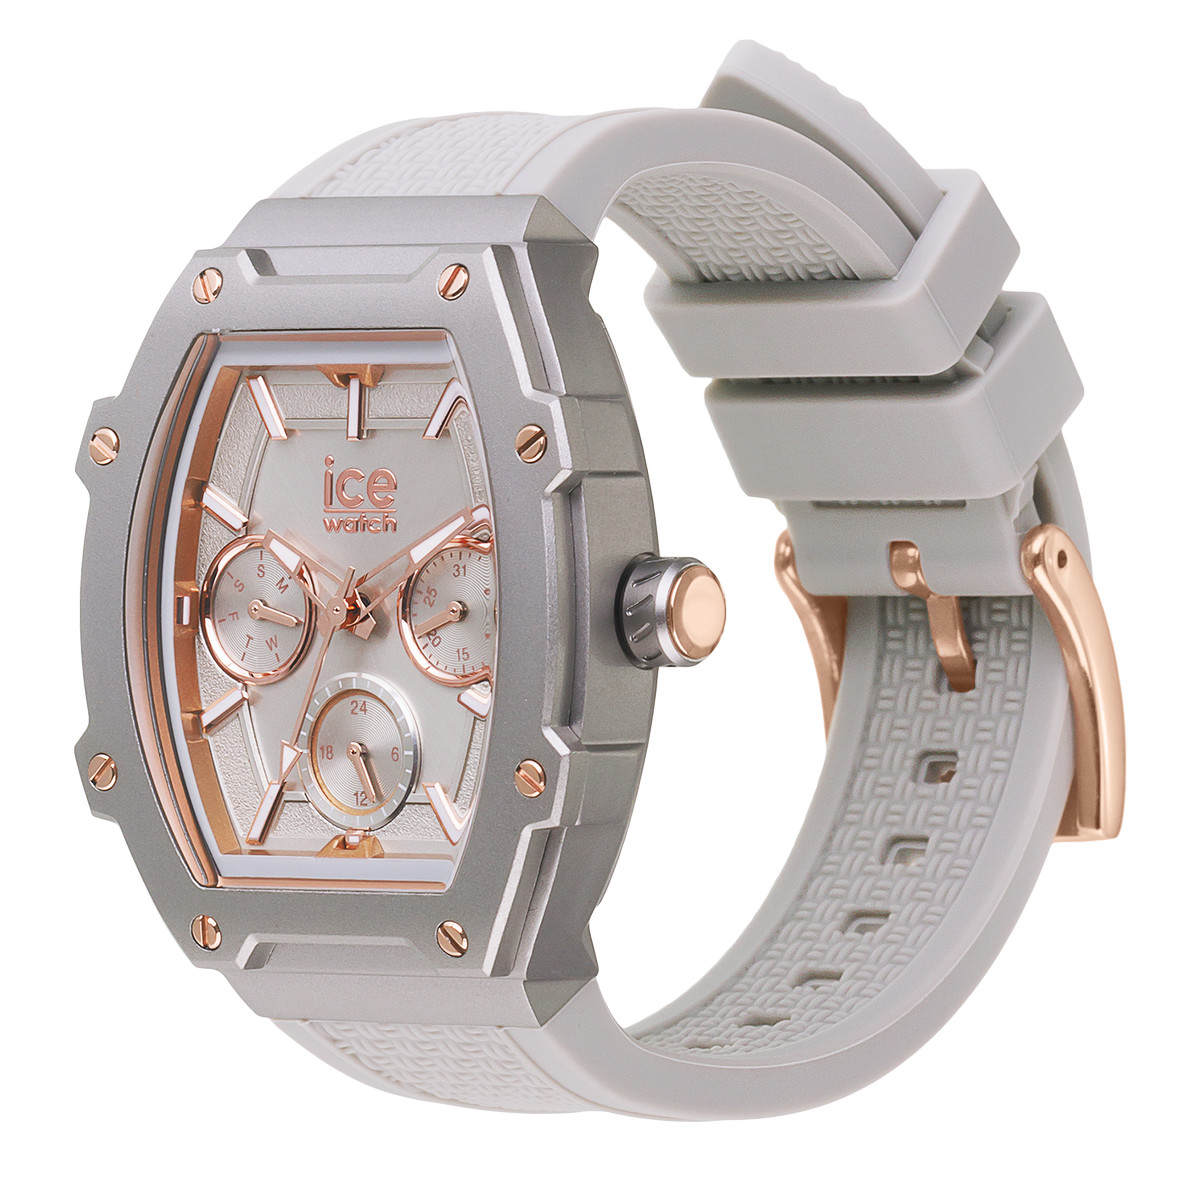 Montre ICE WATCH Ice boliday femme bracelet silicone gris - vue D1